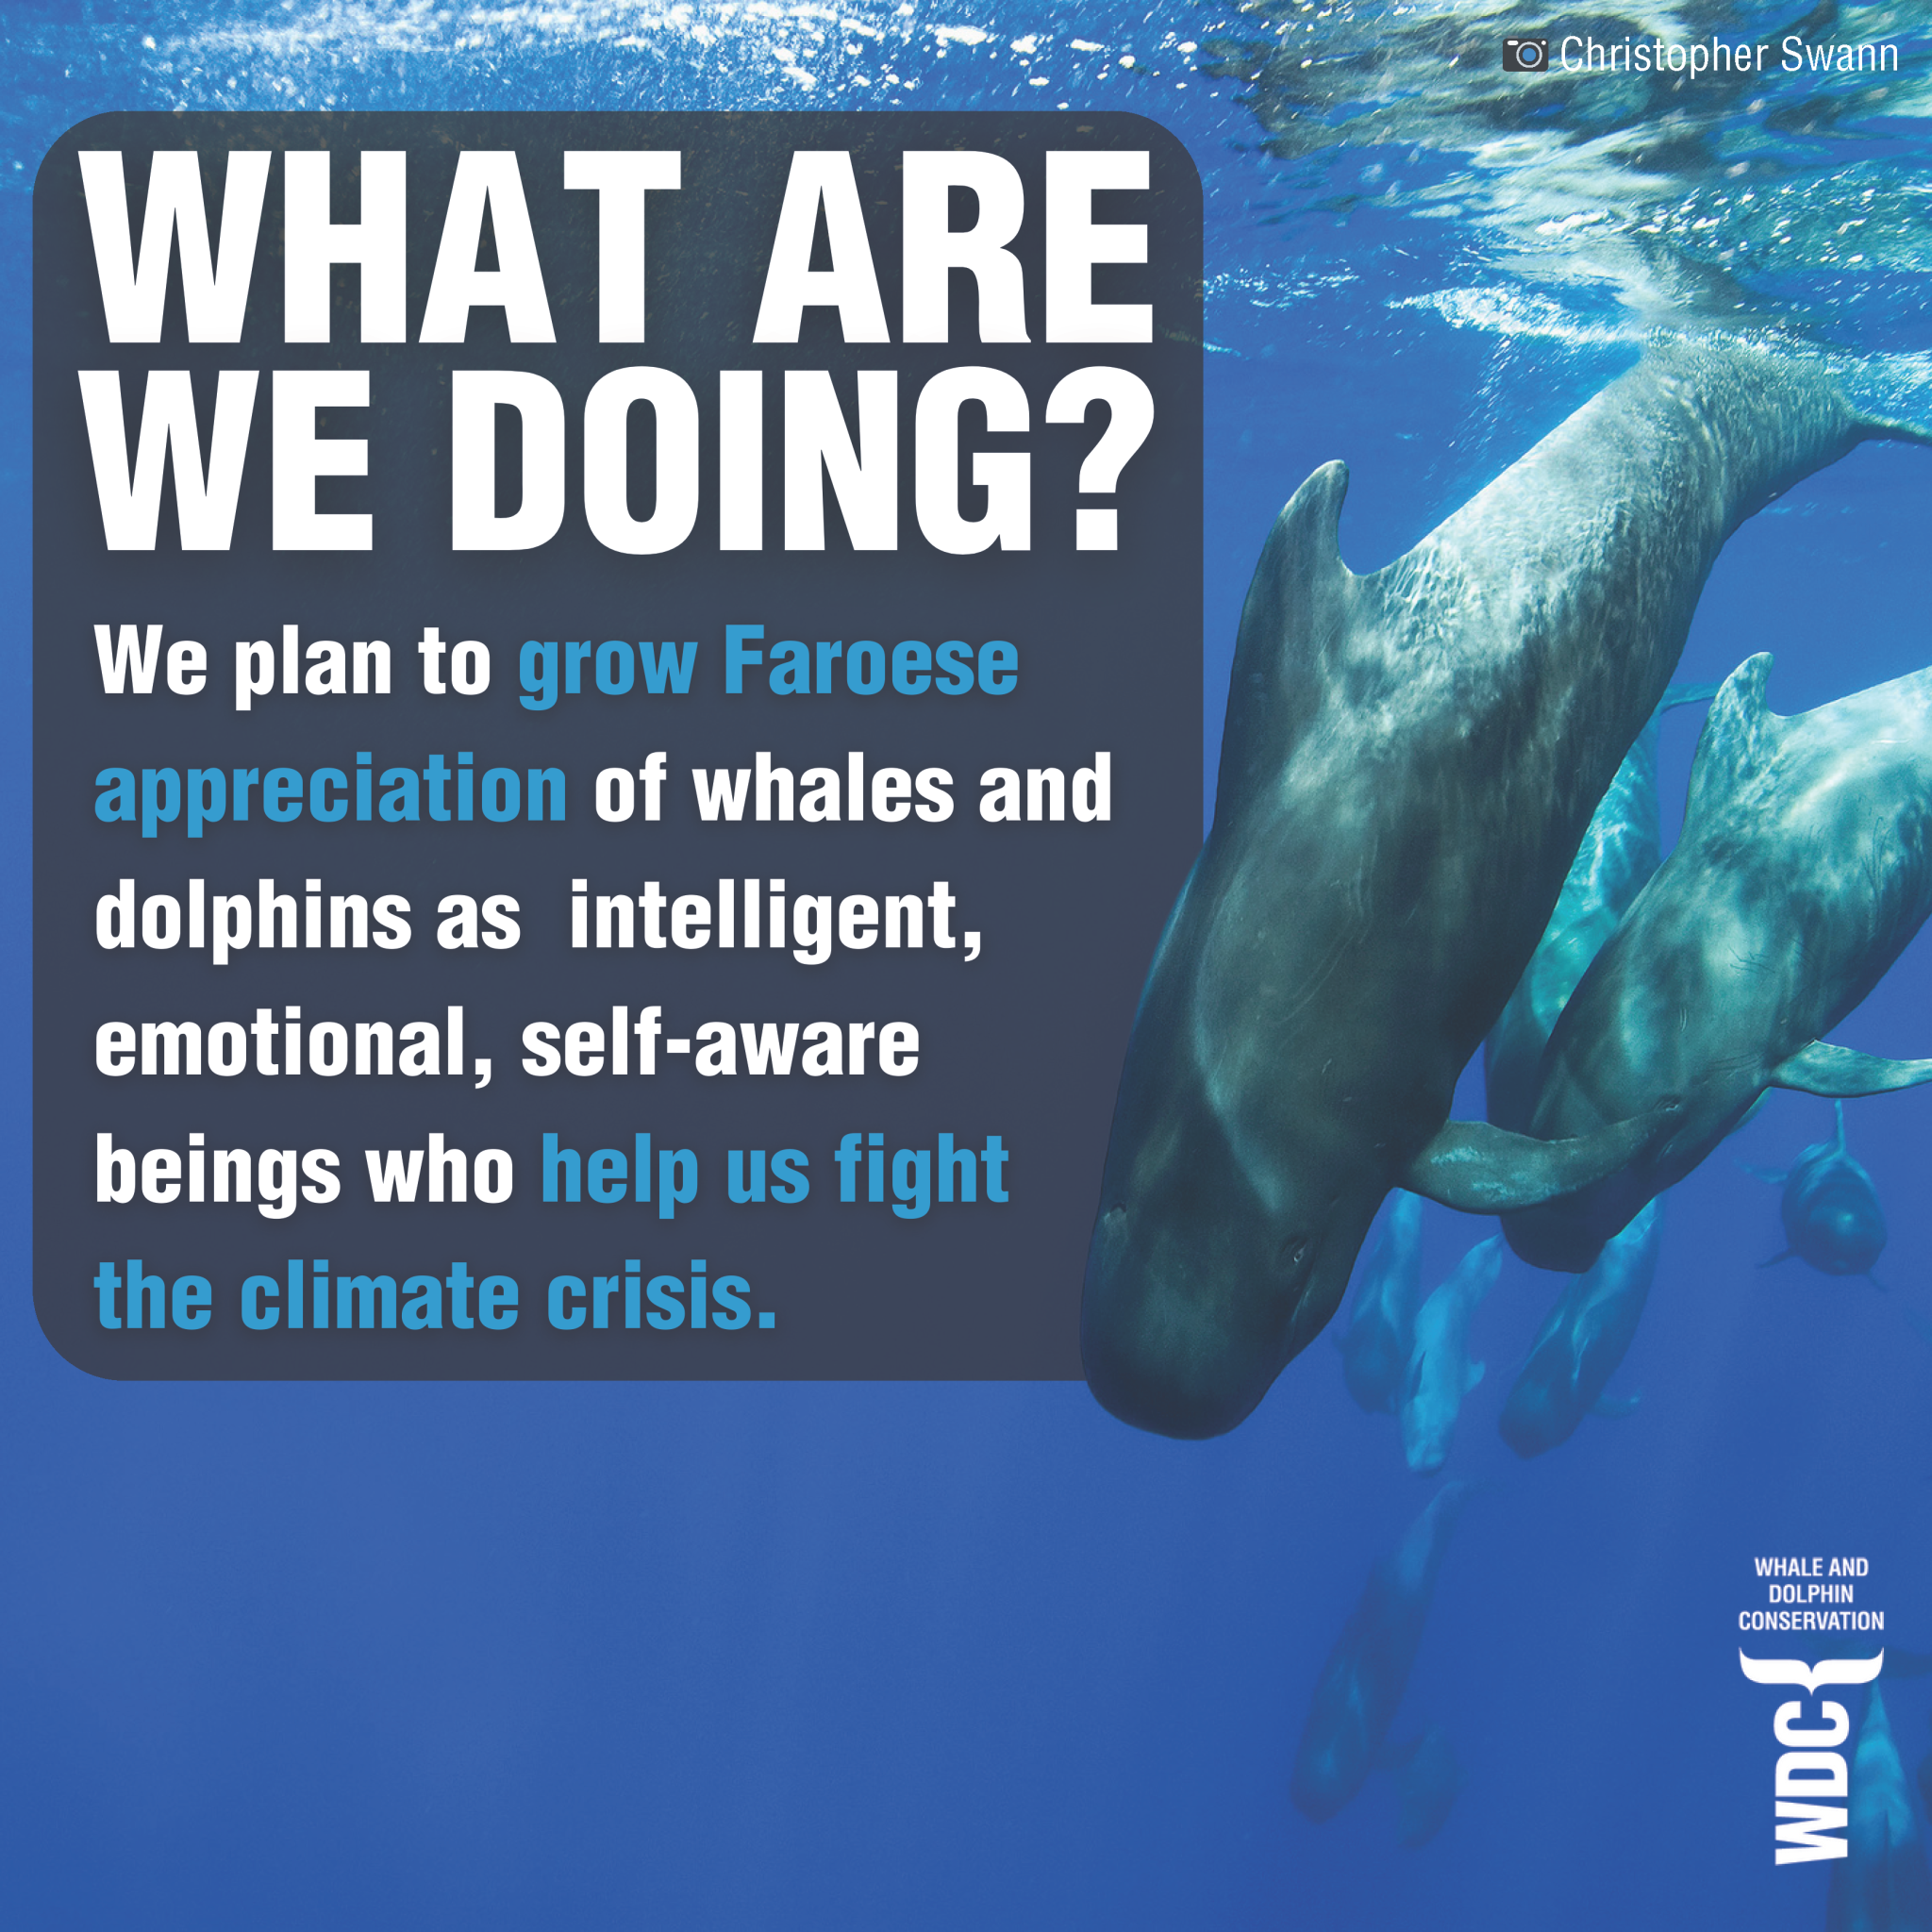 What are we doing? We plan to grow Faroese appreciation of whales and dolphins as intelligent, emotional, self-aware beings who help us fight the climate crisis.